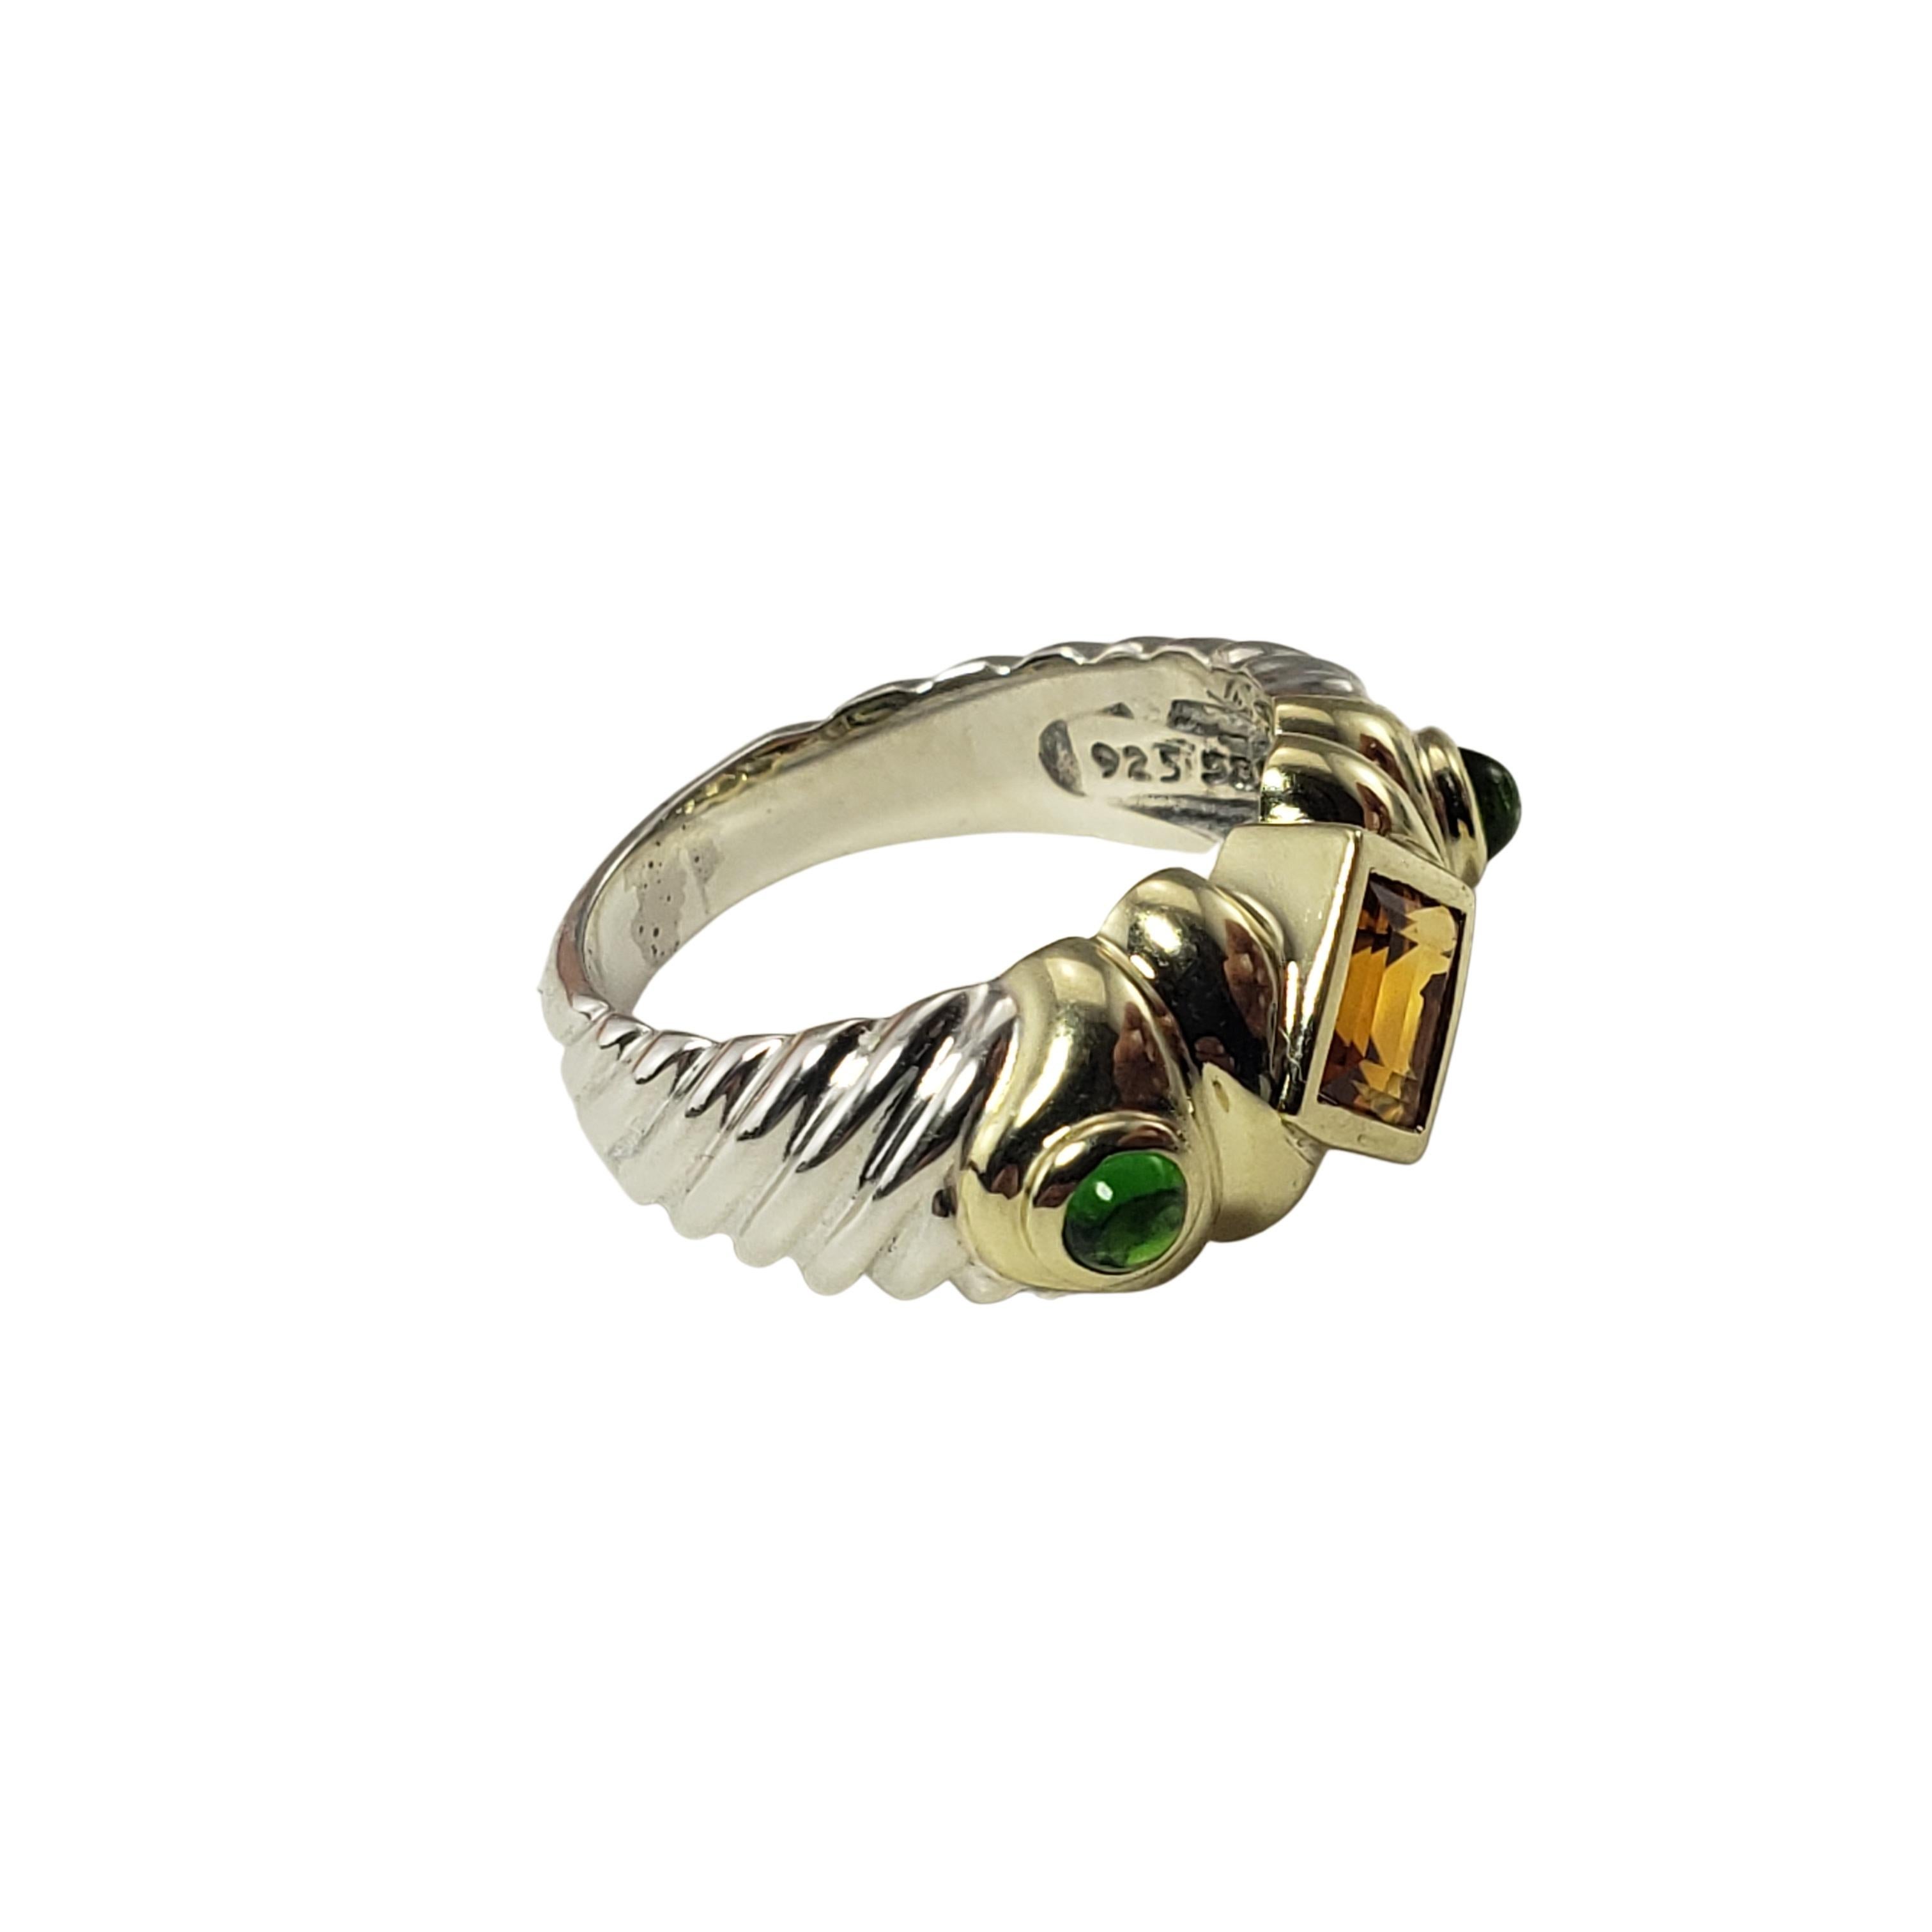 David Yurman Sterling Silver and 14 Karat Yellow Gold Citrine and Emerald Ring Size 5-

This lovely ring by David Yurman features on citrine stone (5 mm) and two cabochon emeralds (3 mm each) set in beautifully detailed sterling silver and 14K